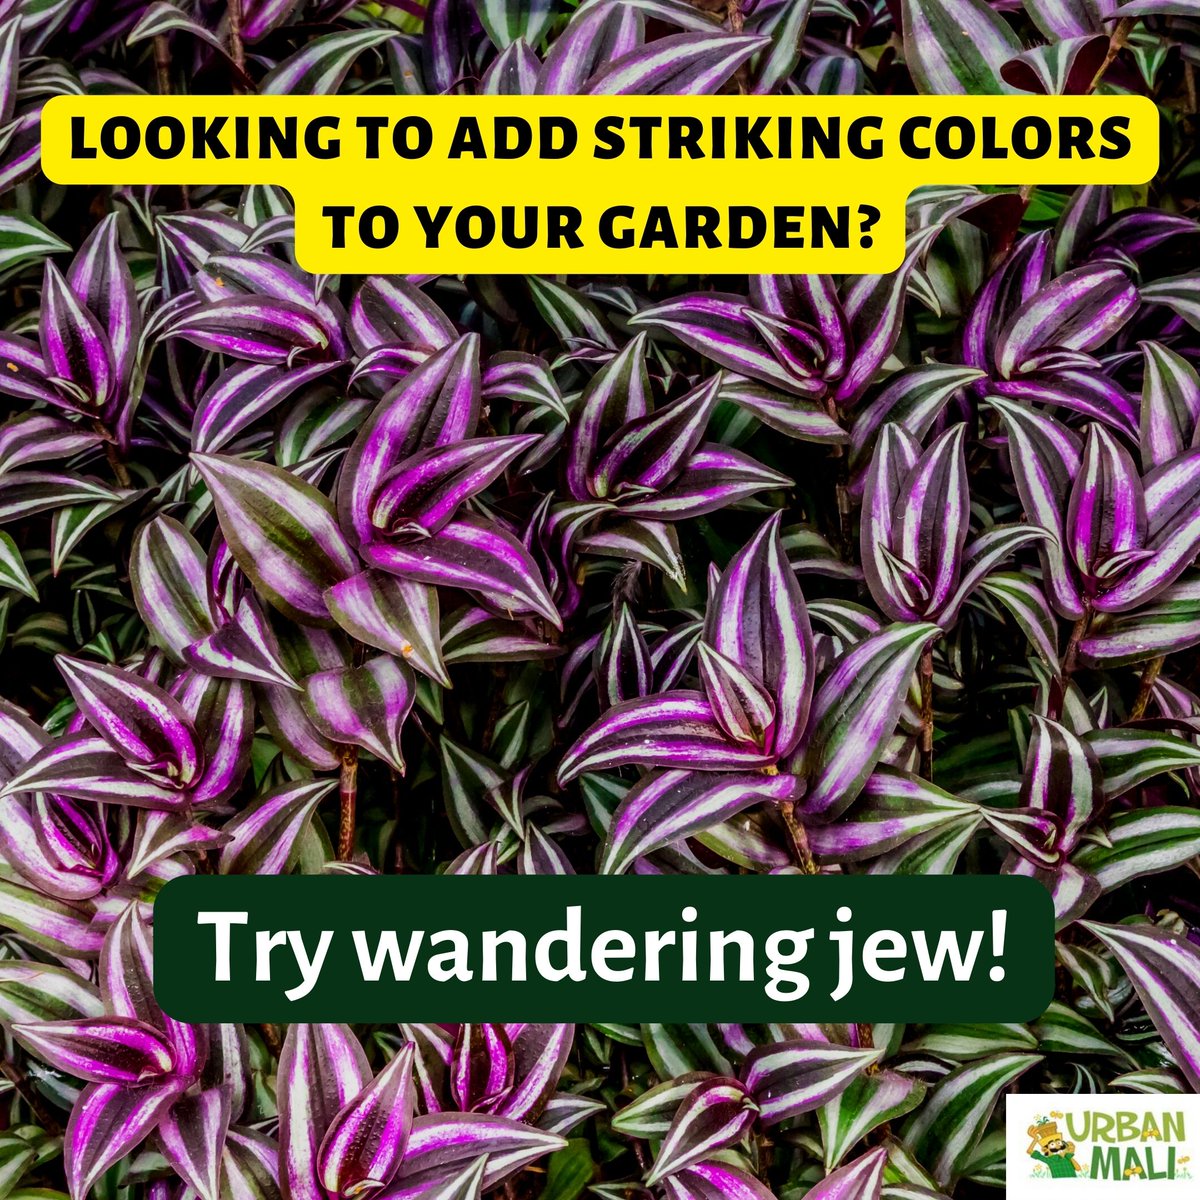 The Wandering Jew (Tradescantia zebrina) is a popular and eye-catching plant known for its vibrant purple, green, and silver leaves. 

#WanderingJew #ColorfulAddition #GardenEnchantment #Eye-catchingPlants  #GreenThumbs #UrbanJungle#UrbanMali #urbangardening #homegardening